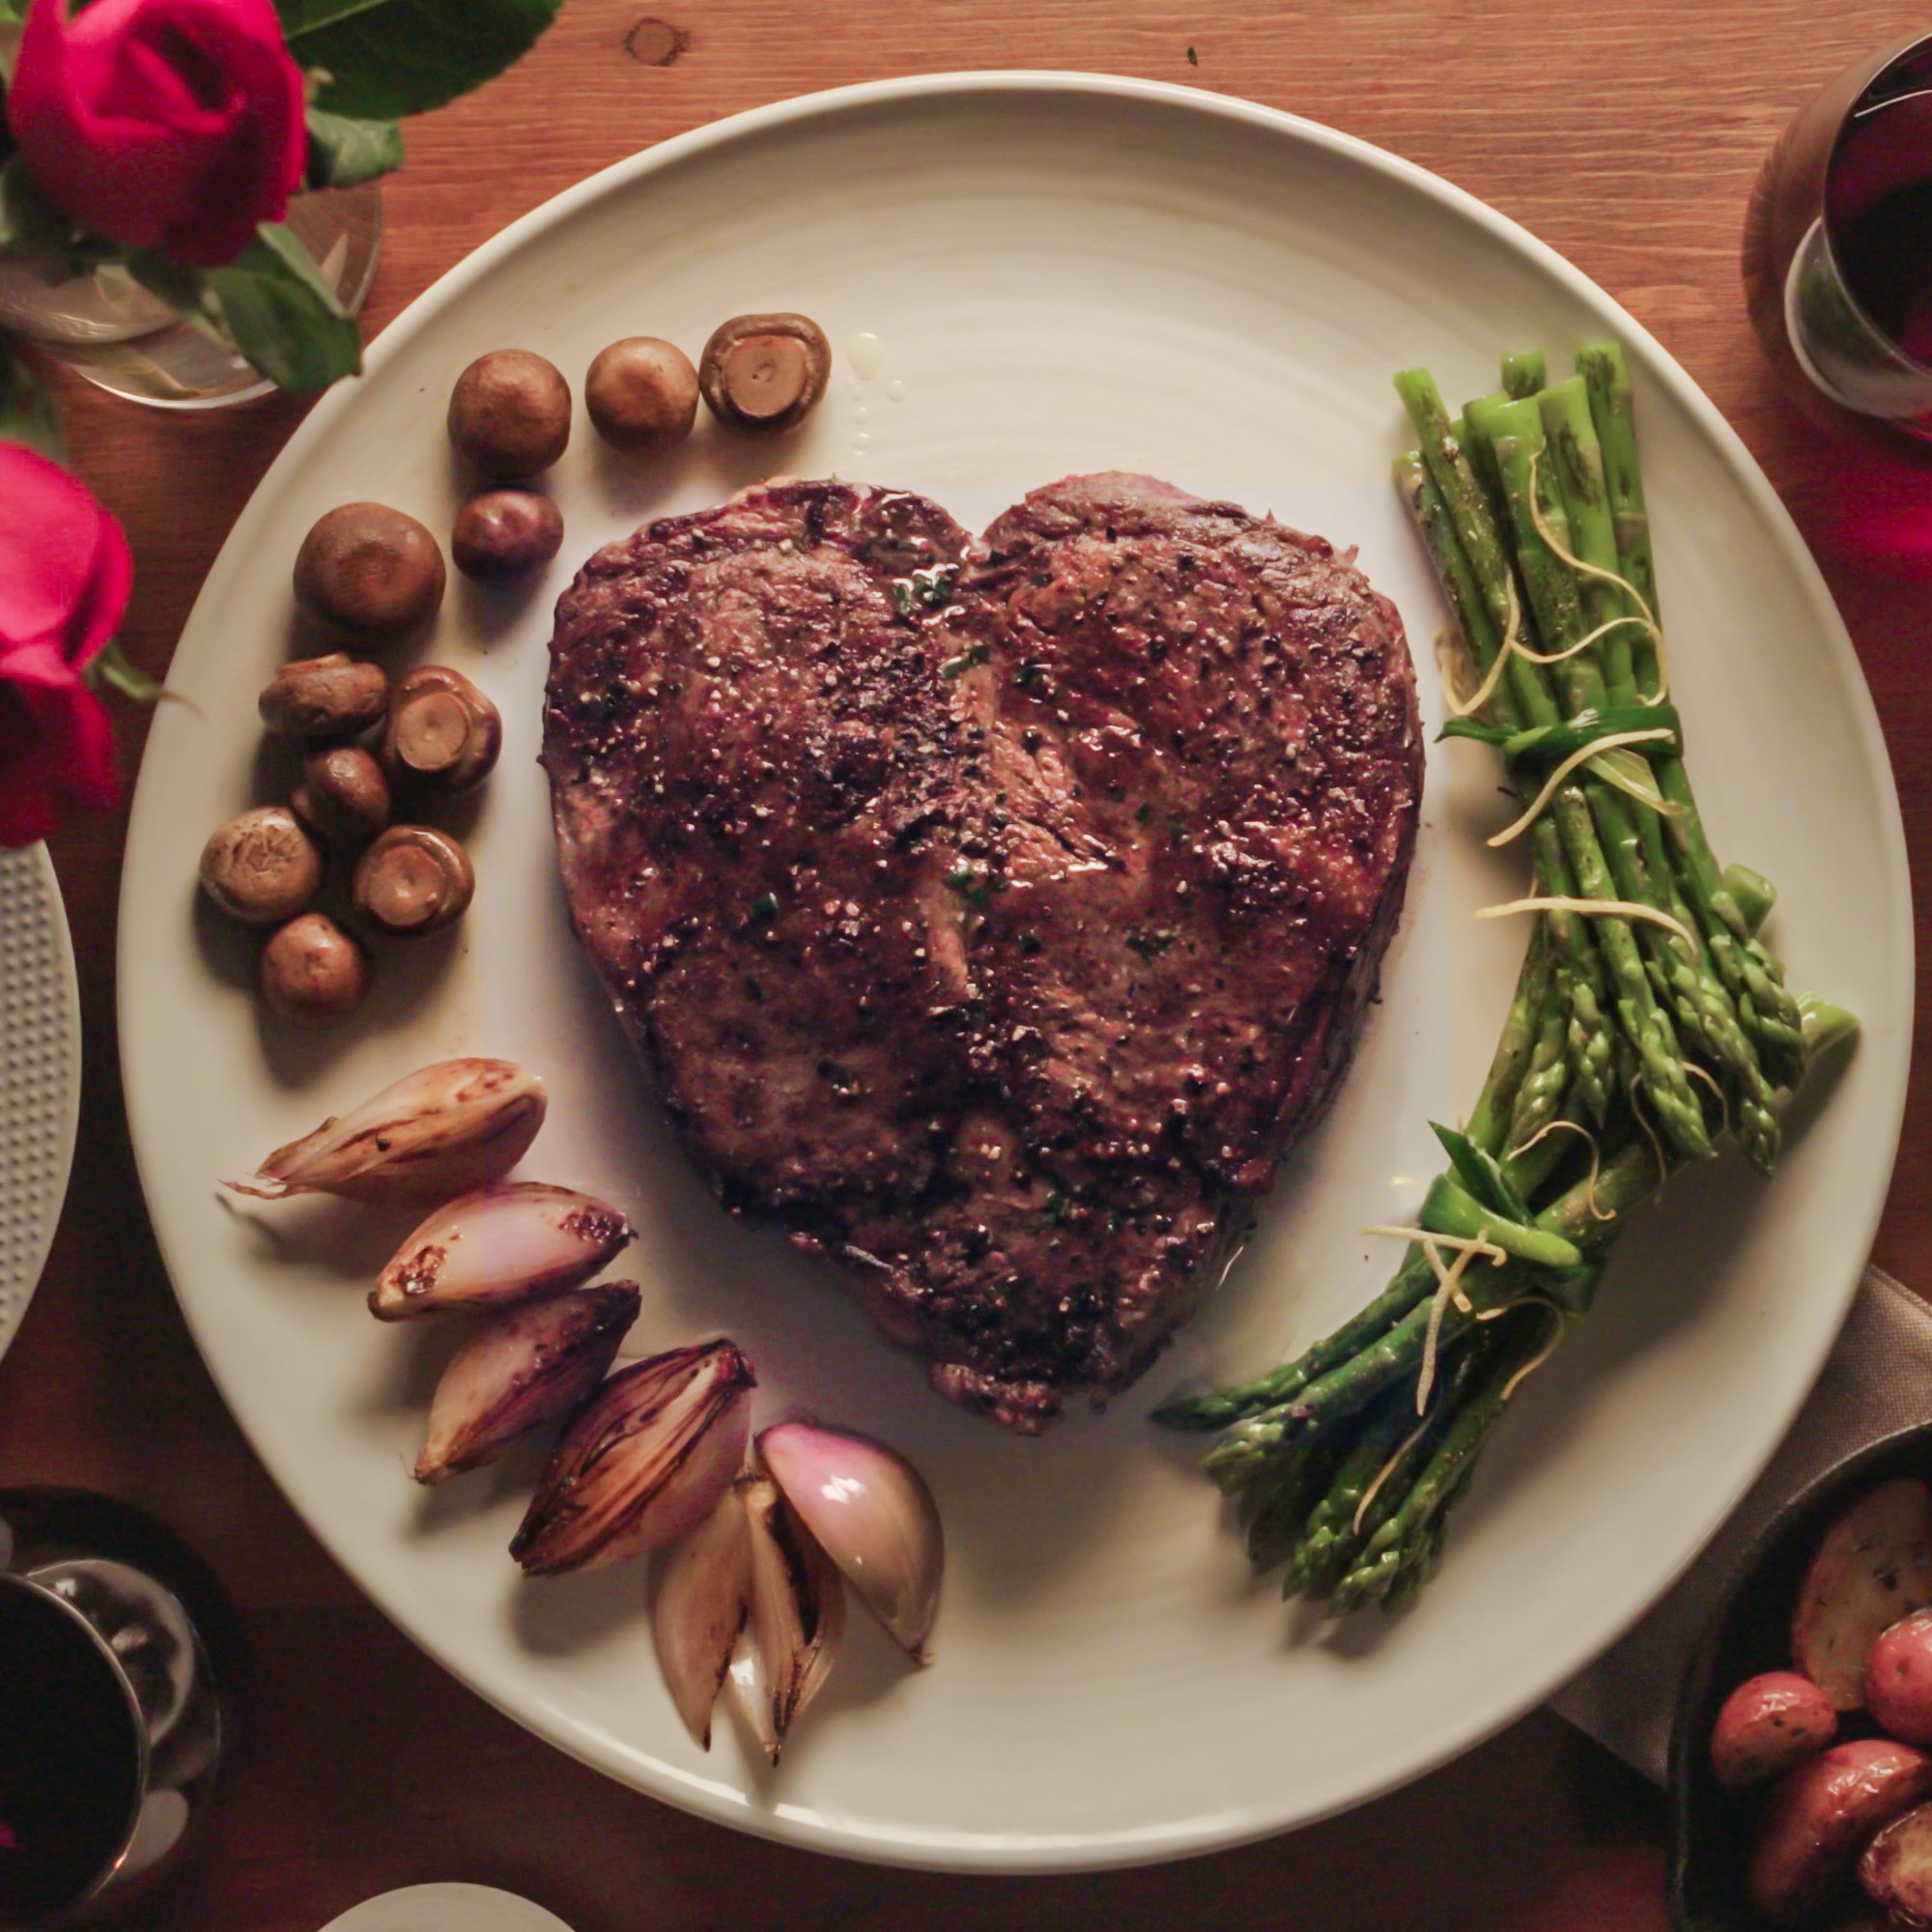 https://images.heb.com/is/image/HEBGrocery/Test/heart-shaped-ribeye-with-herb-butter-recipe.jpg